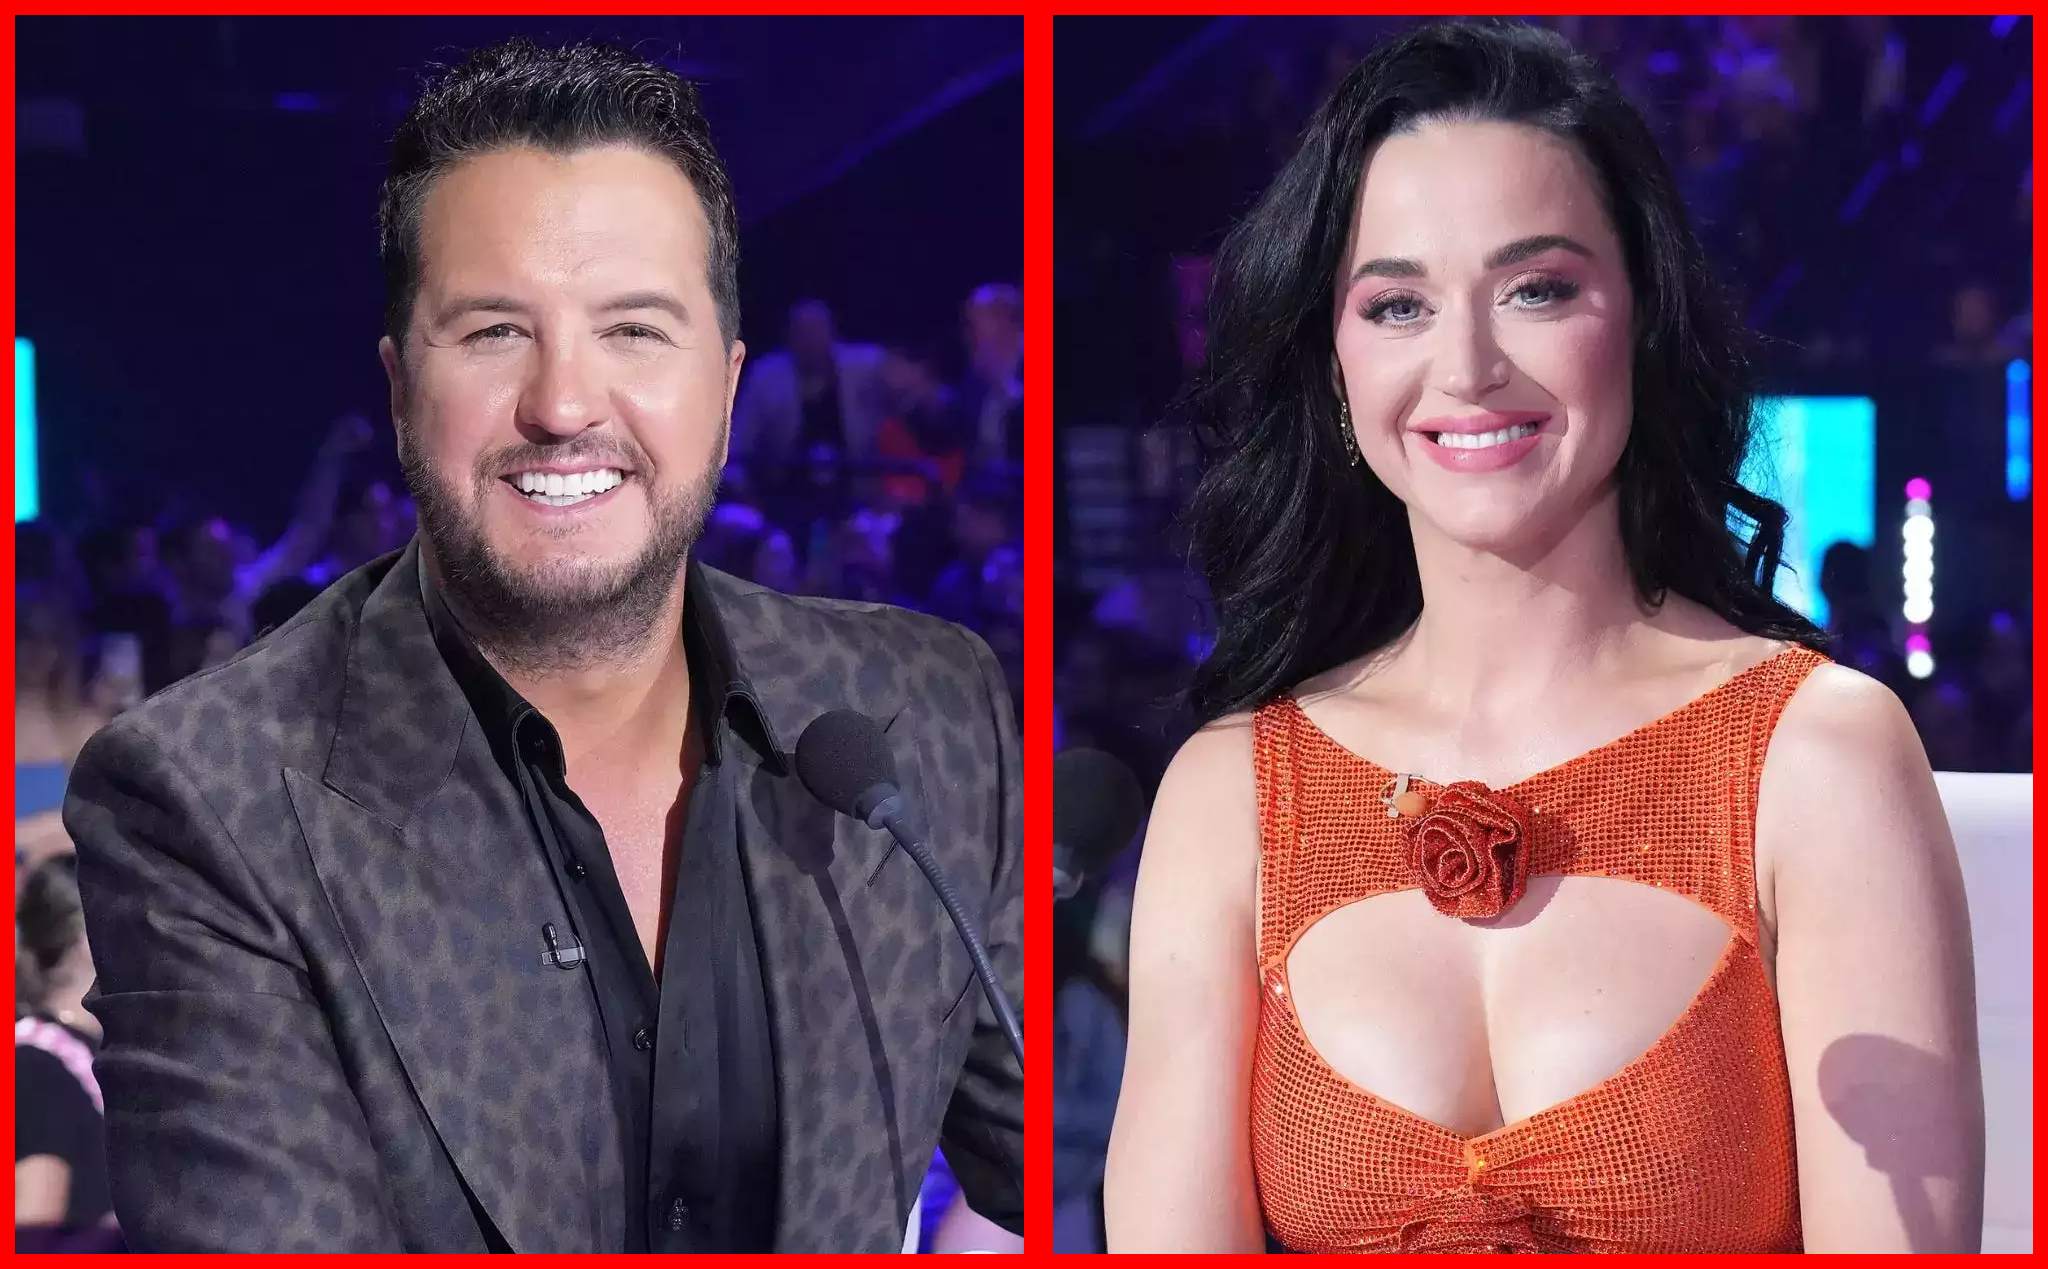 luke-bryan-defends-katy-perry-after-american-idol-backlash-she-gets-picked-on-for-going-out-and-trying-to-have-fun